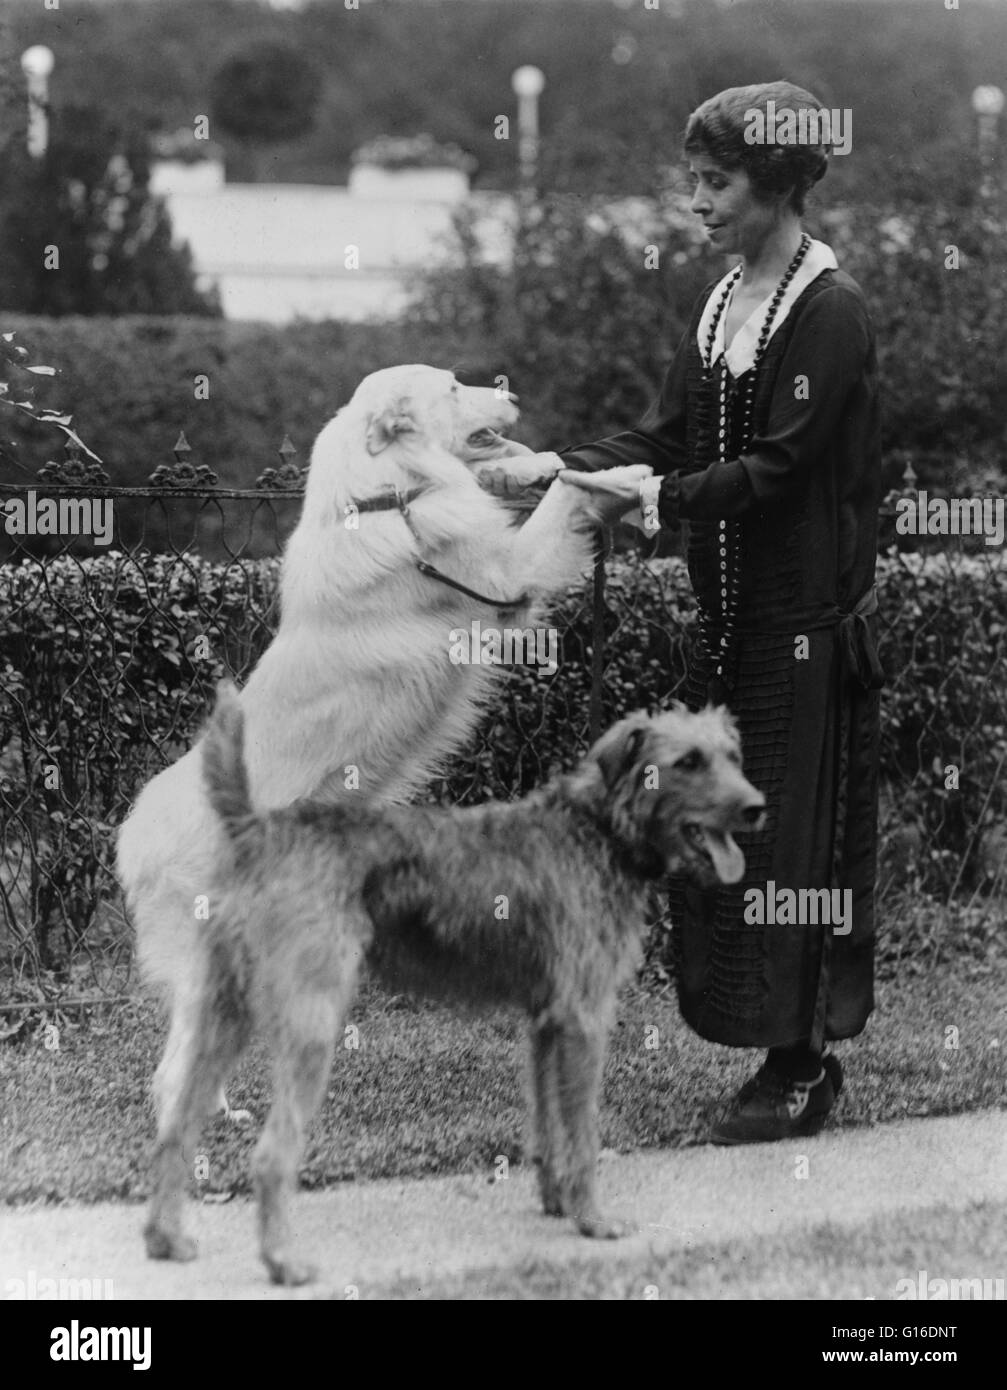 Grace Coolidge with two dogs, holding the front paws of one. Grace Anna Goodhue Coolidge (January 3, 1879 - July 8, 1957) was the wife of Calvin Coolidge and First Lady of the United States from 1923 to 1929. She graduated from the University of Vermont i Stock Photo